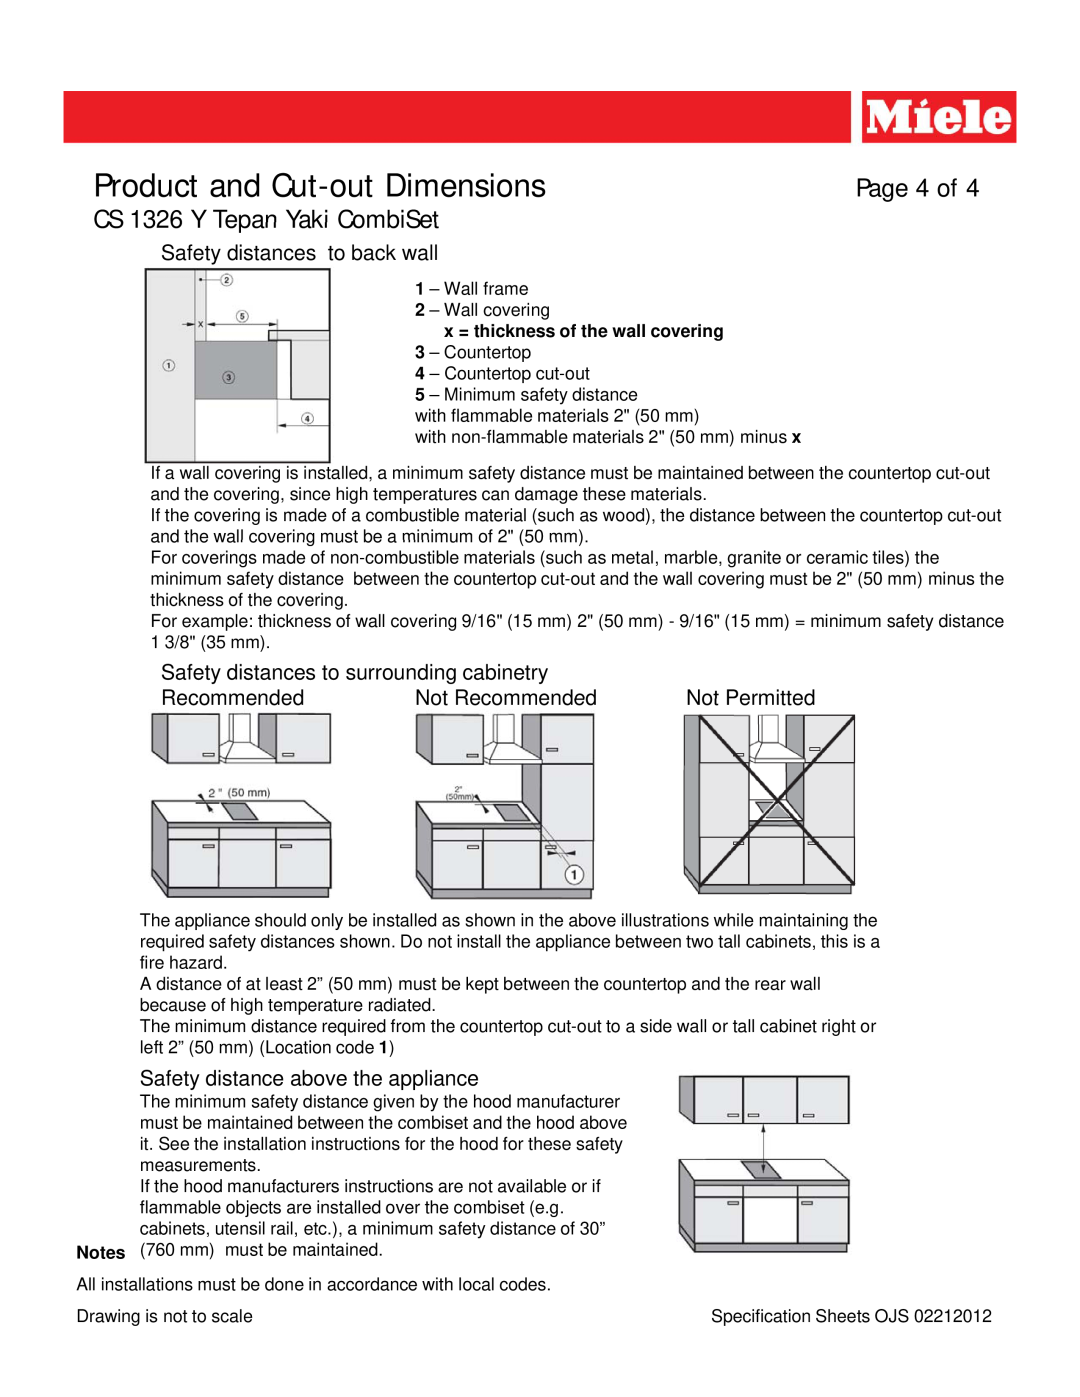 Miele CS 1326 Y x = thickness of the wall covering 3 - Countertop, Product and Cut-outDimensions, Page 4 of, Recommended 